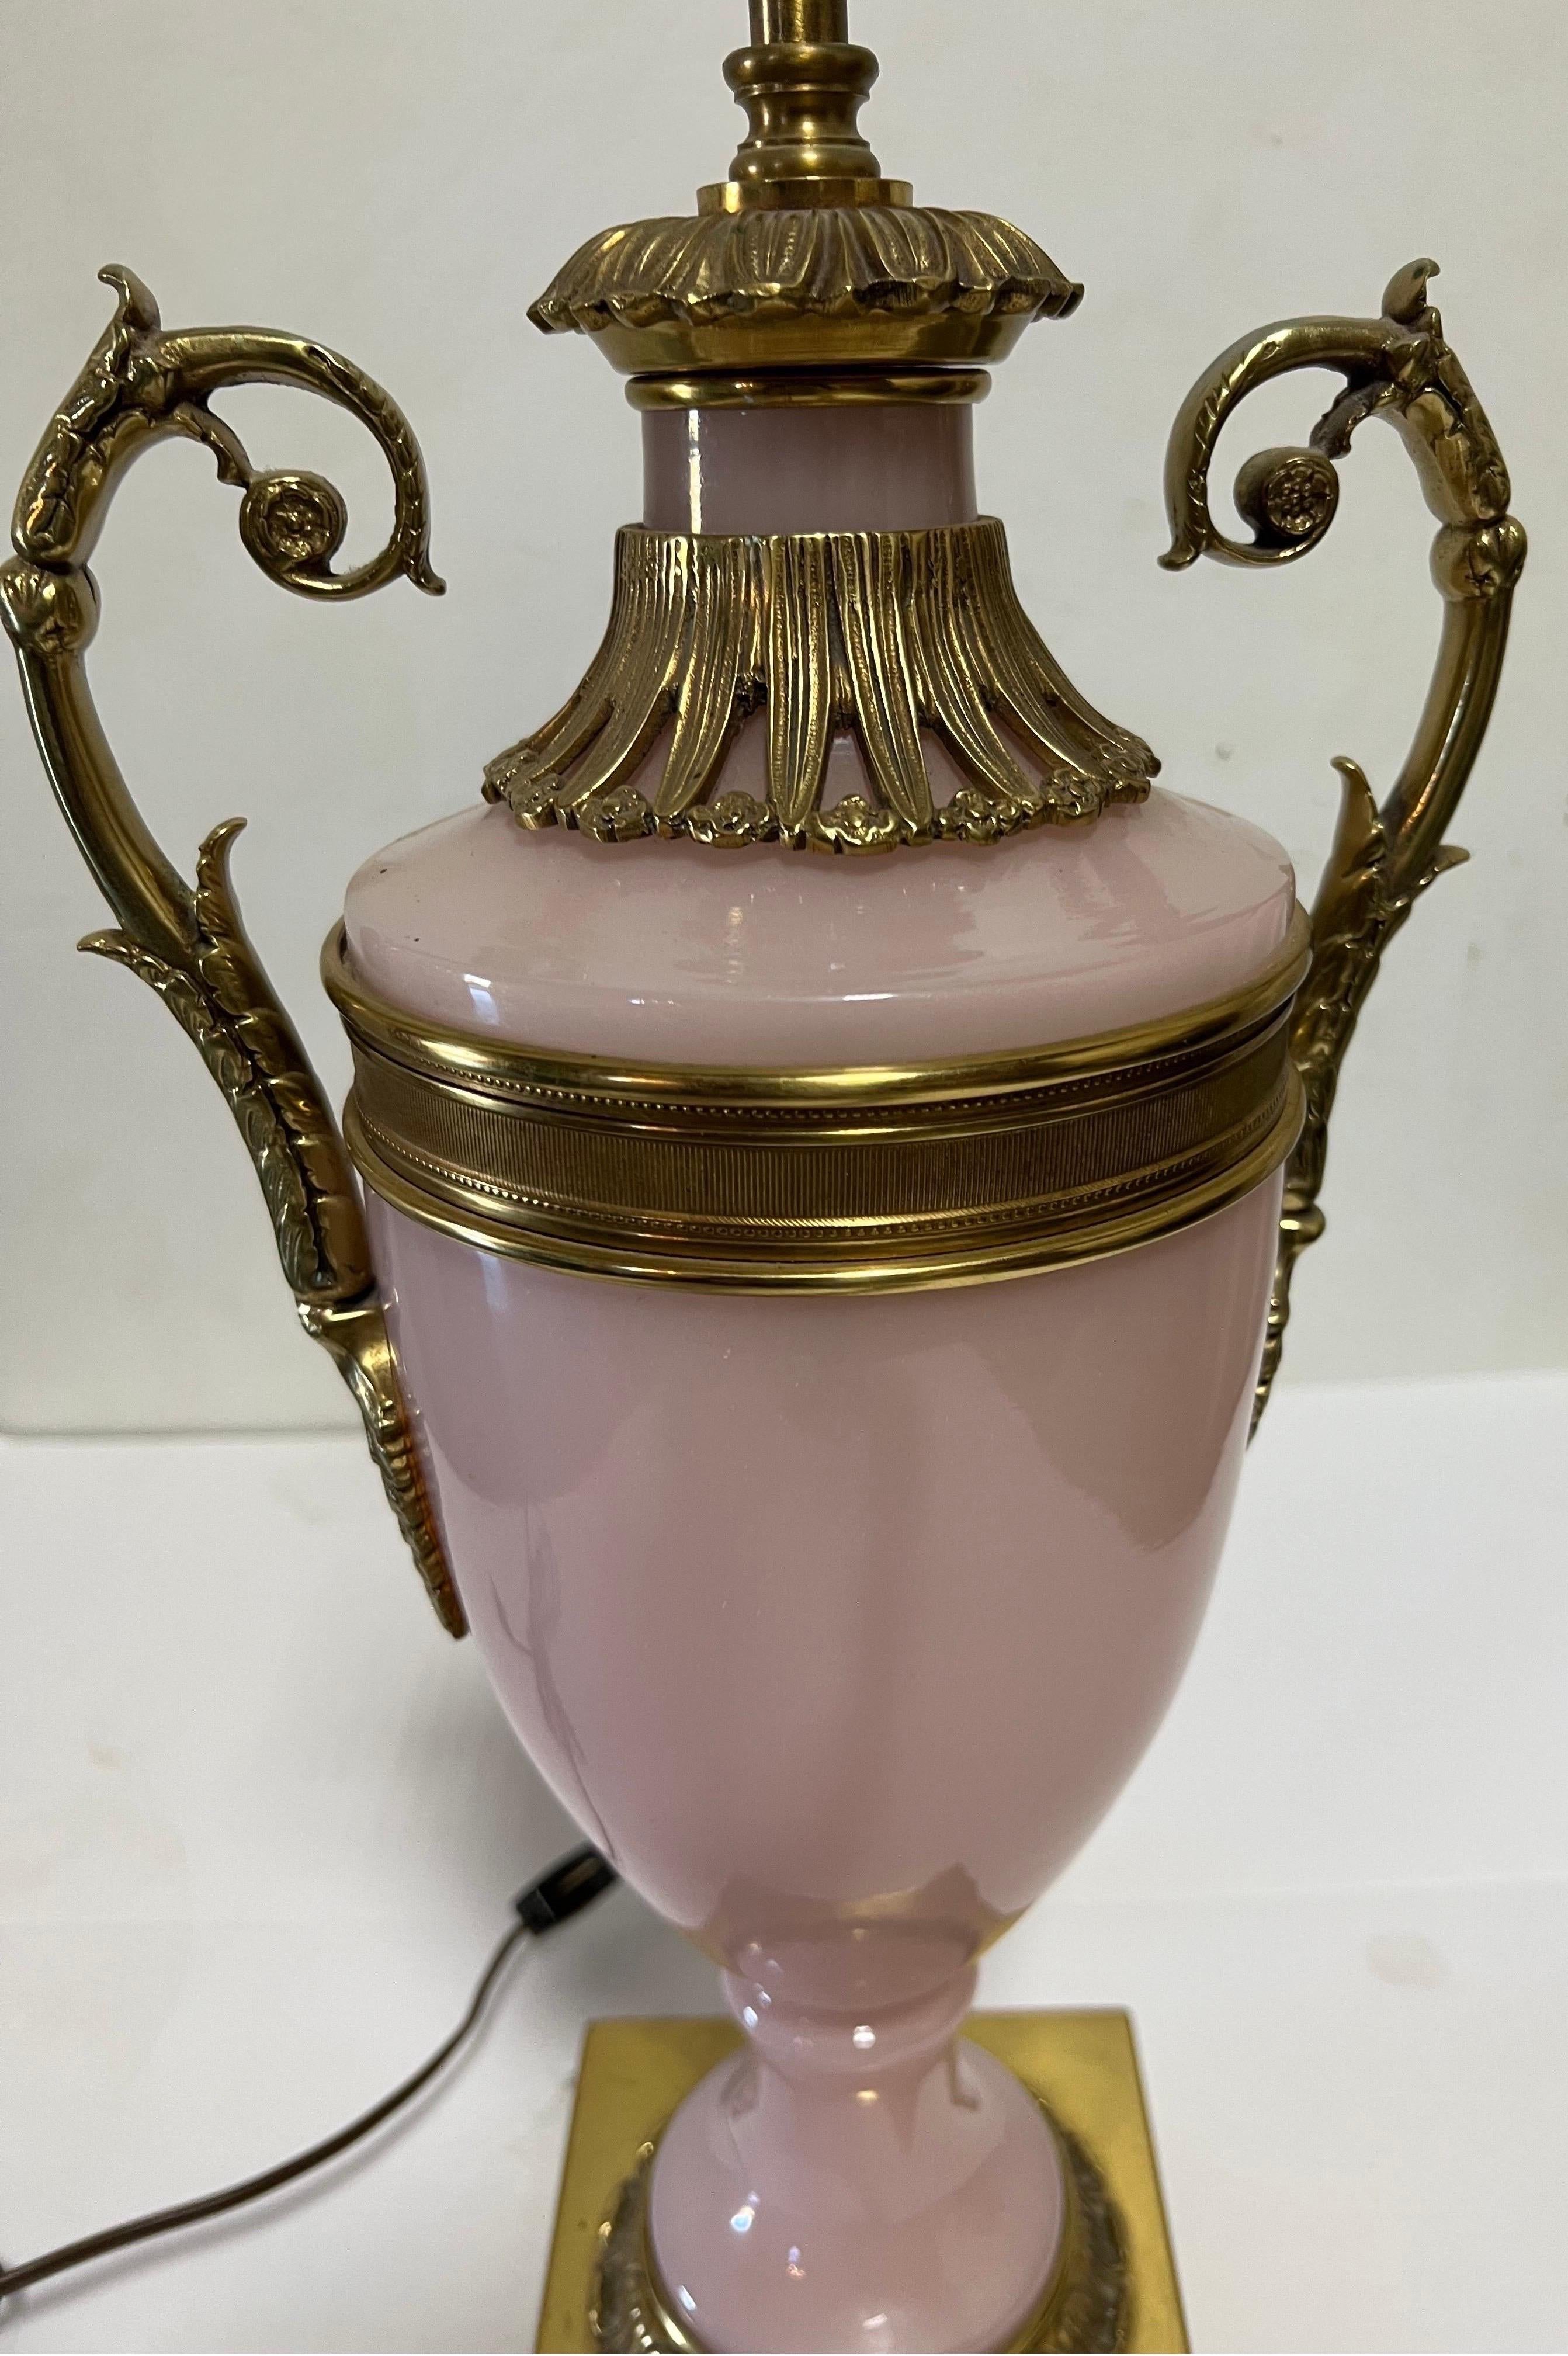 Warren Kessler pink glass and bronze table lamp. 

USA, circa 1950.

Signed with foil sticker.

Featuring an urn shape, complemented by bronze accents on a bronze plinth base. Brass hardware; wired for US; takes 2 standard US bulbs, 75 watts